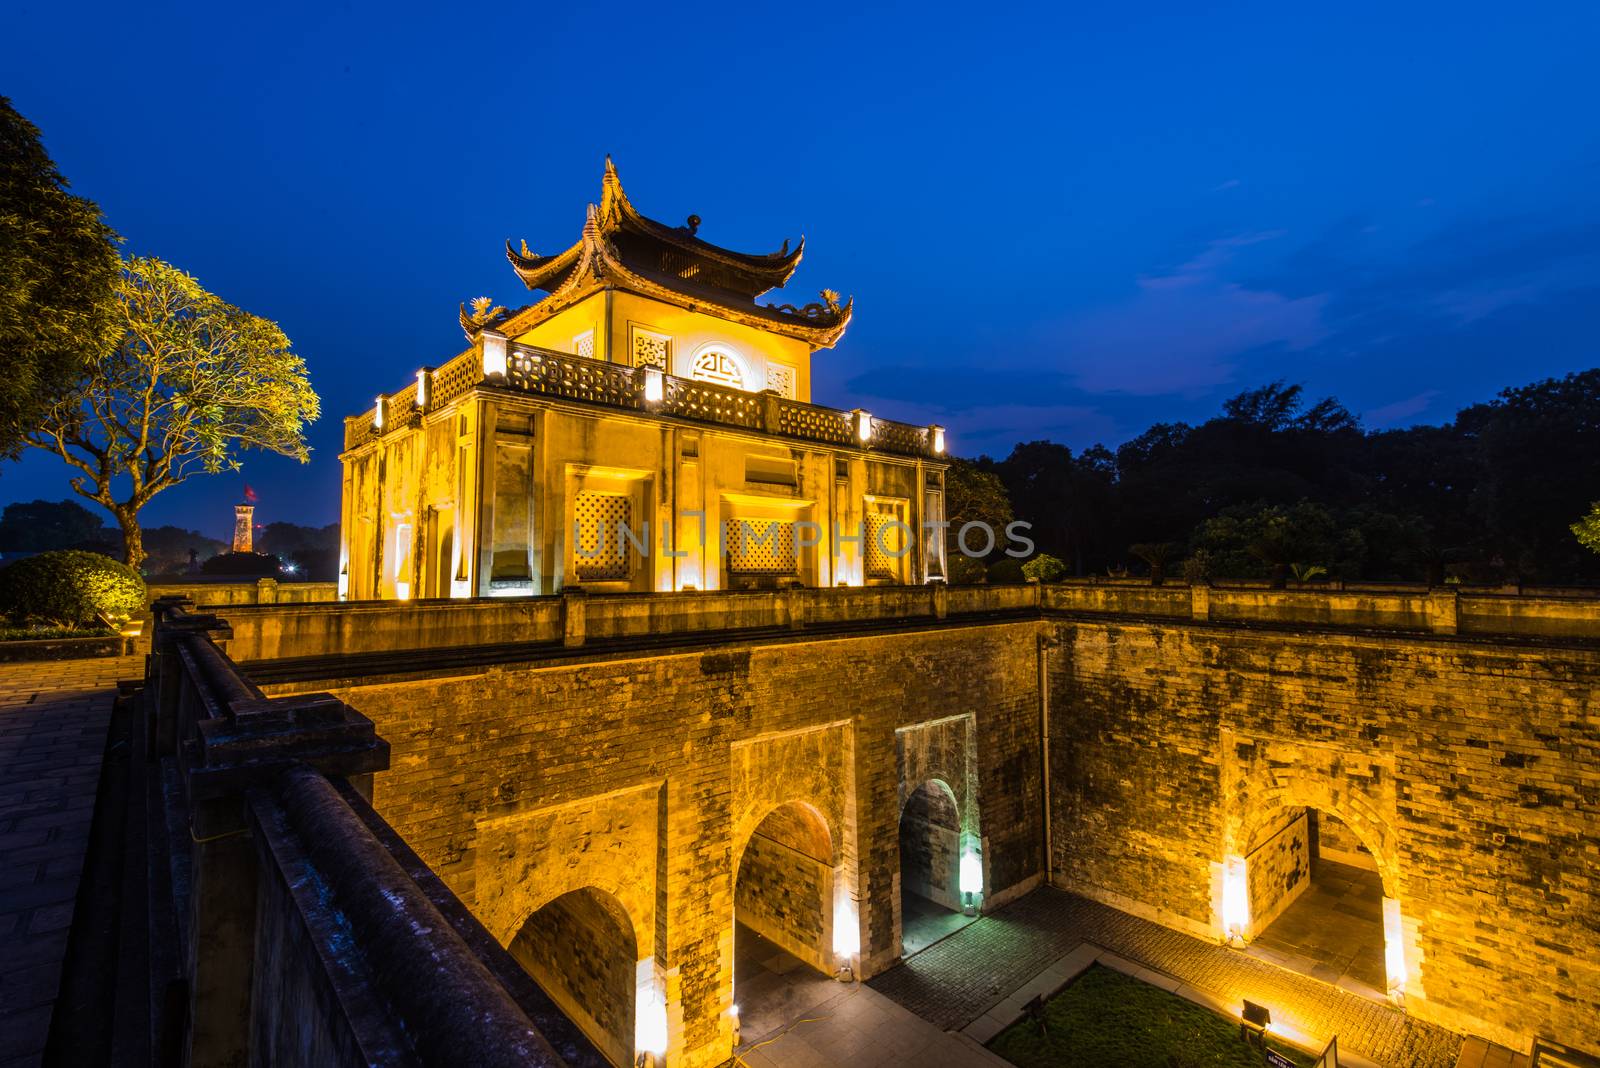 The Imperial Citadel of Thang Long  is the cultural complex comprising the royal enclosure first built during the Lý Dynasty and subsequently expanded by the Trần, Lê and finally the Nguyễn Dynasty. The ruins roughly coincide with the Hanoi Citadel today.